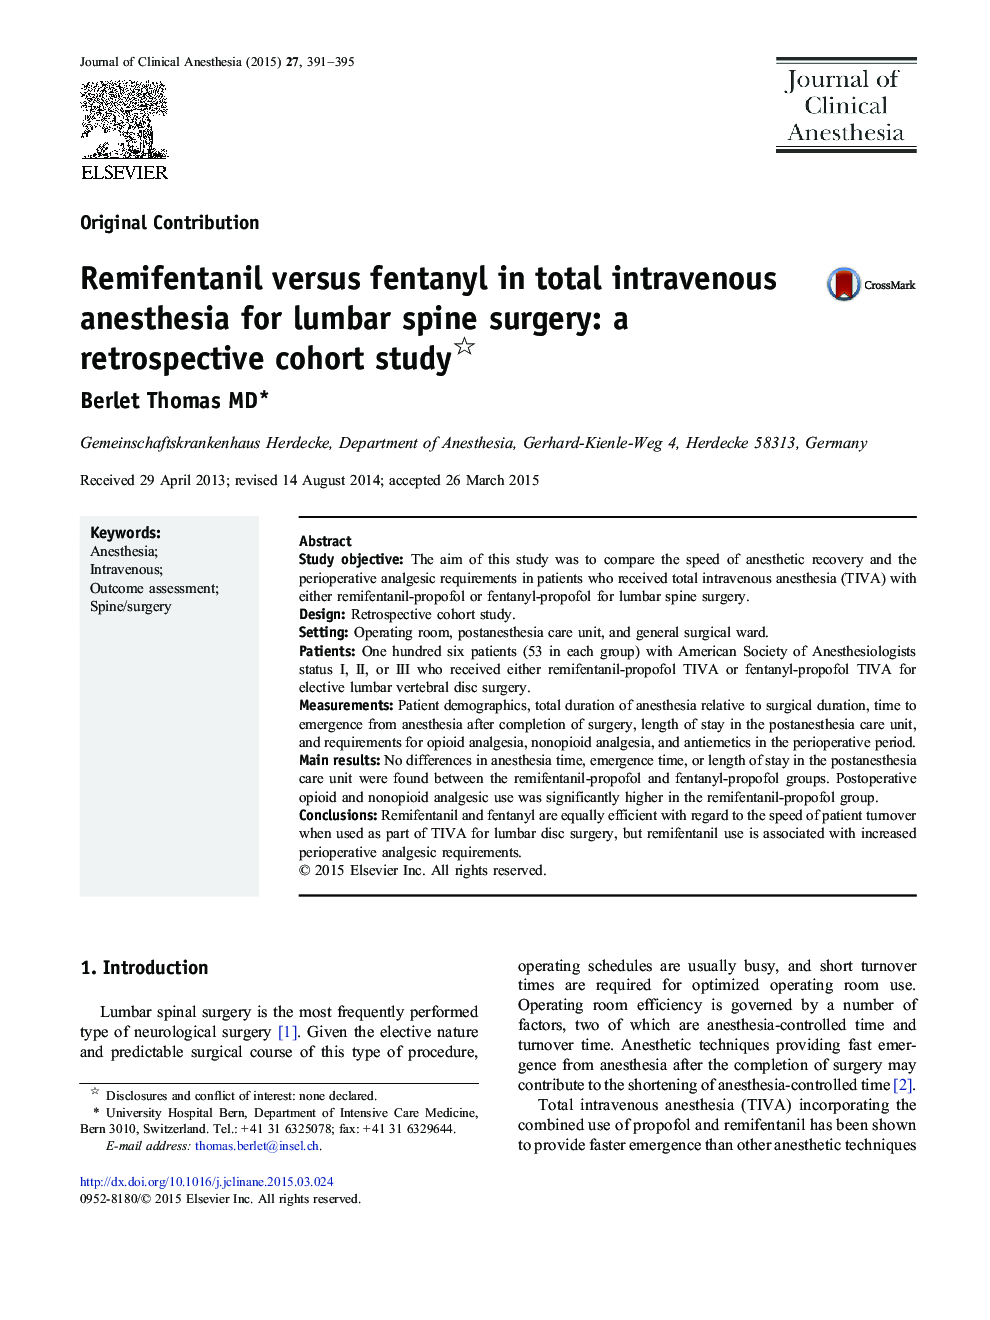 Remifentanil versus fentanyl in total intravenous anesthesia for lumbar spine surgery: a retrospective cohort study 